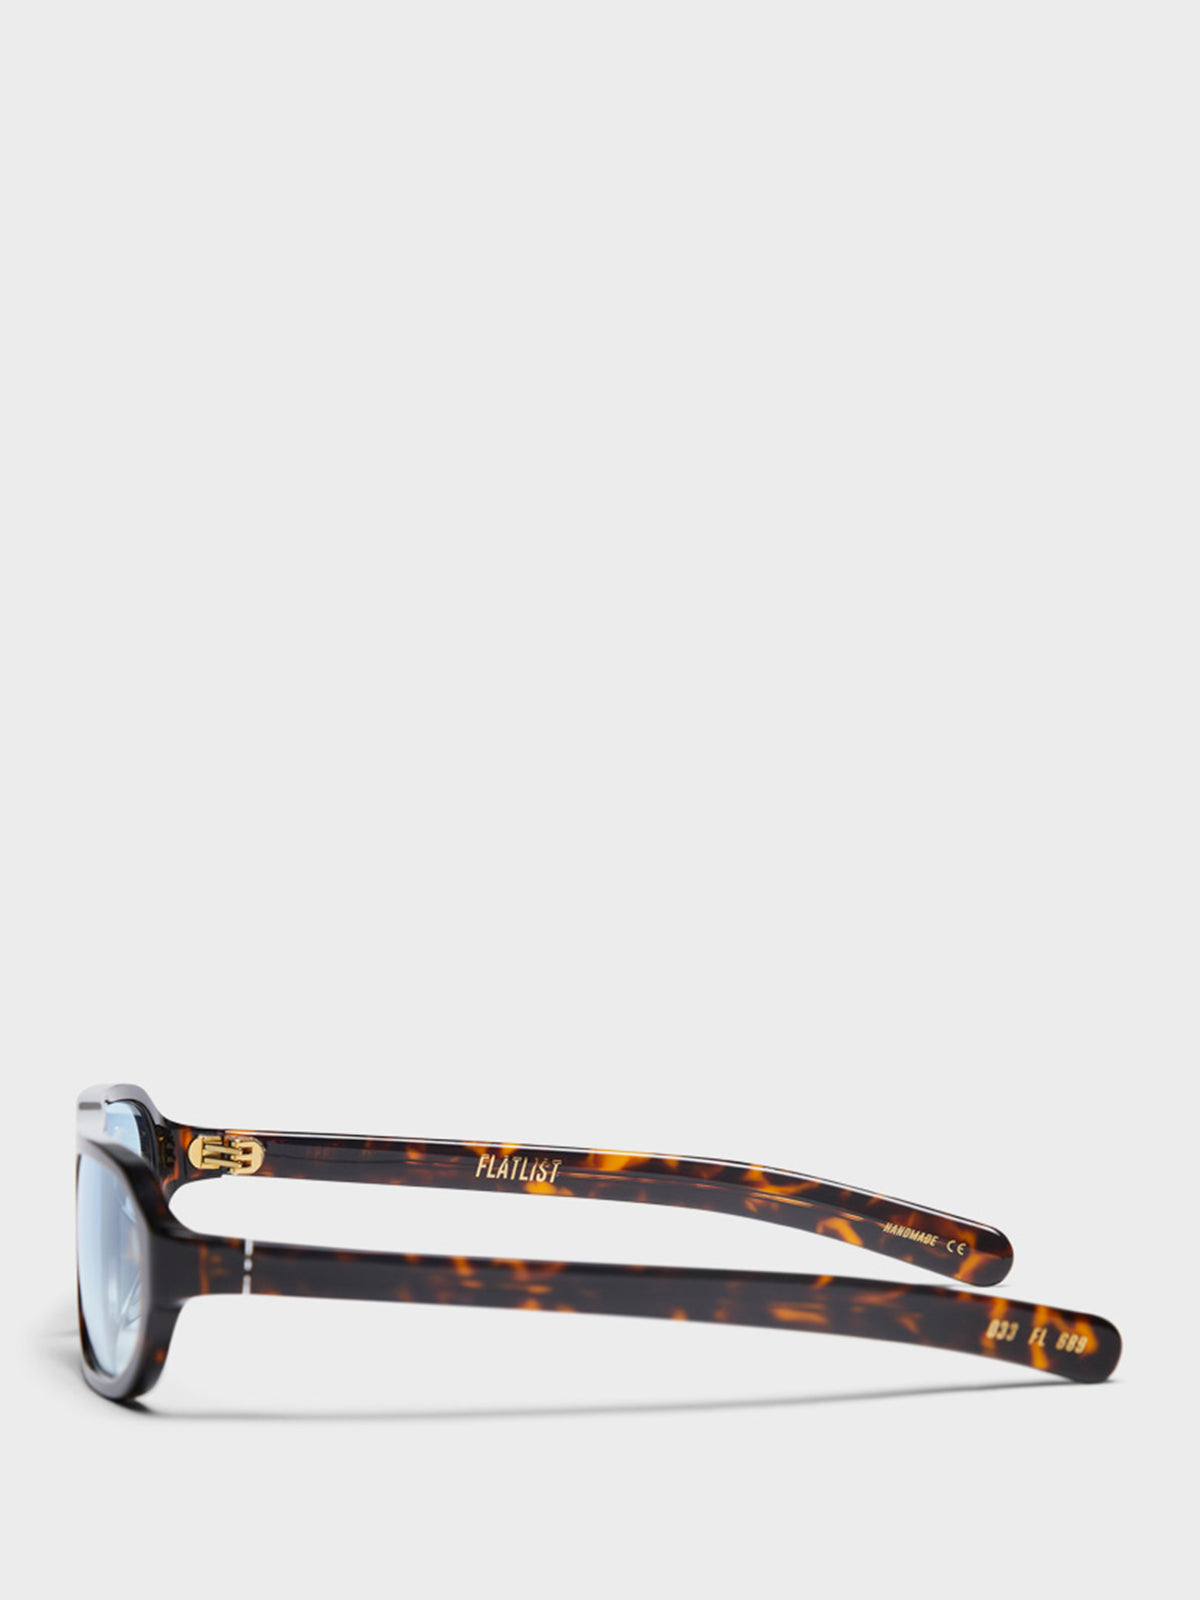 Penn Sunglasses in Brown and Blue Gradient Lens